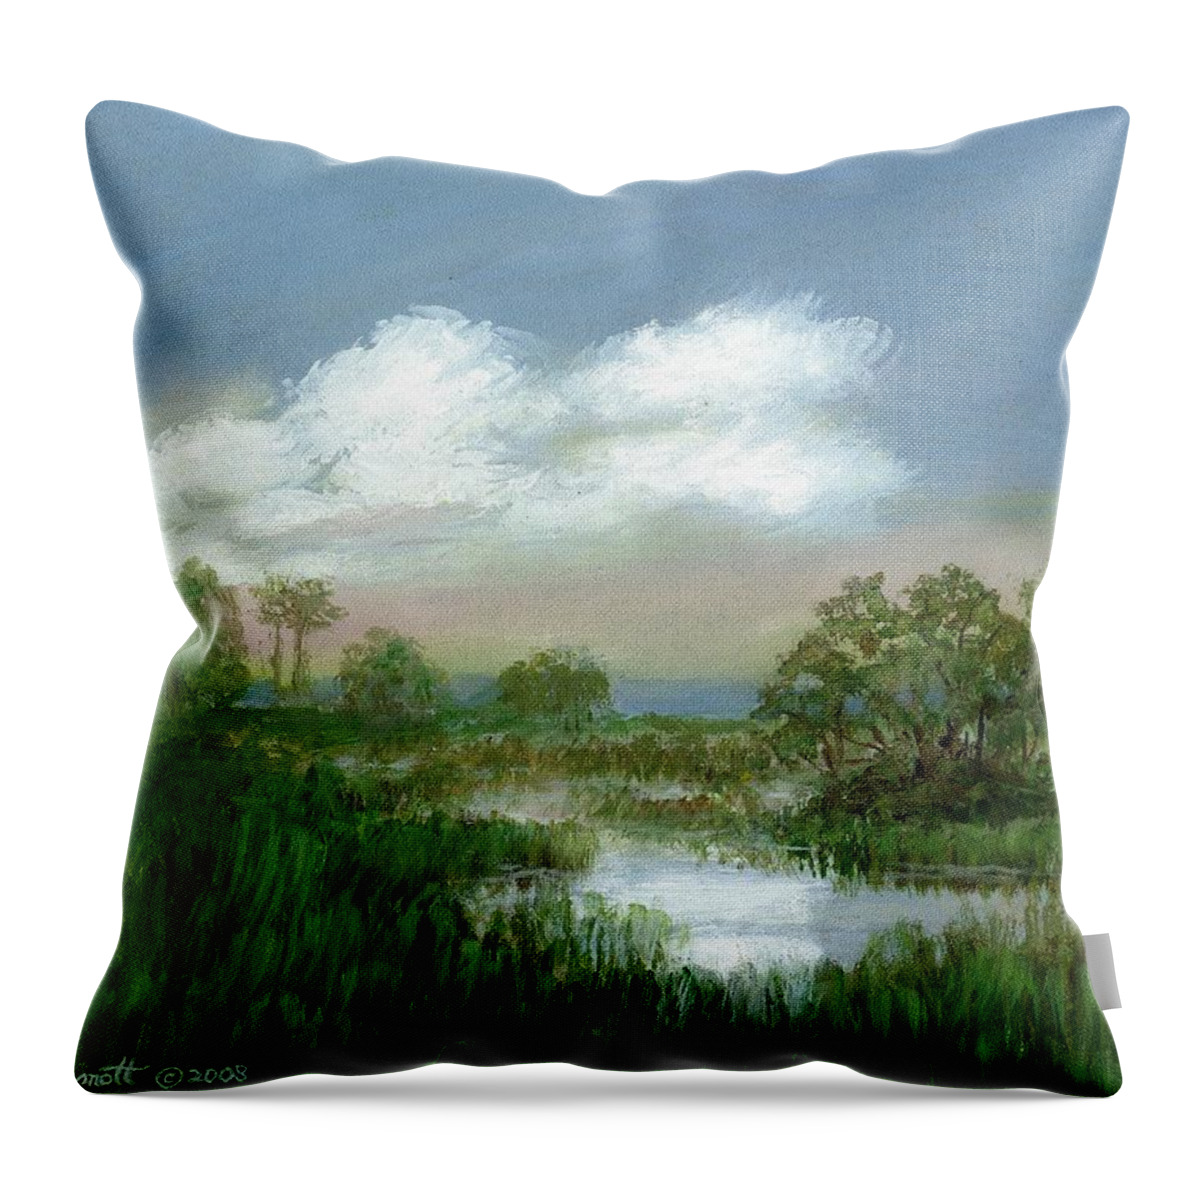 Marsh Landscape Throw Pillow featuring the painting Marsh Sketch by Kathleen McDermott